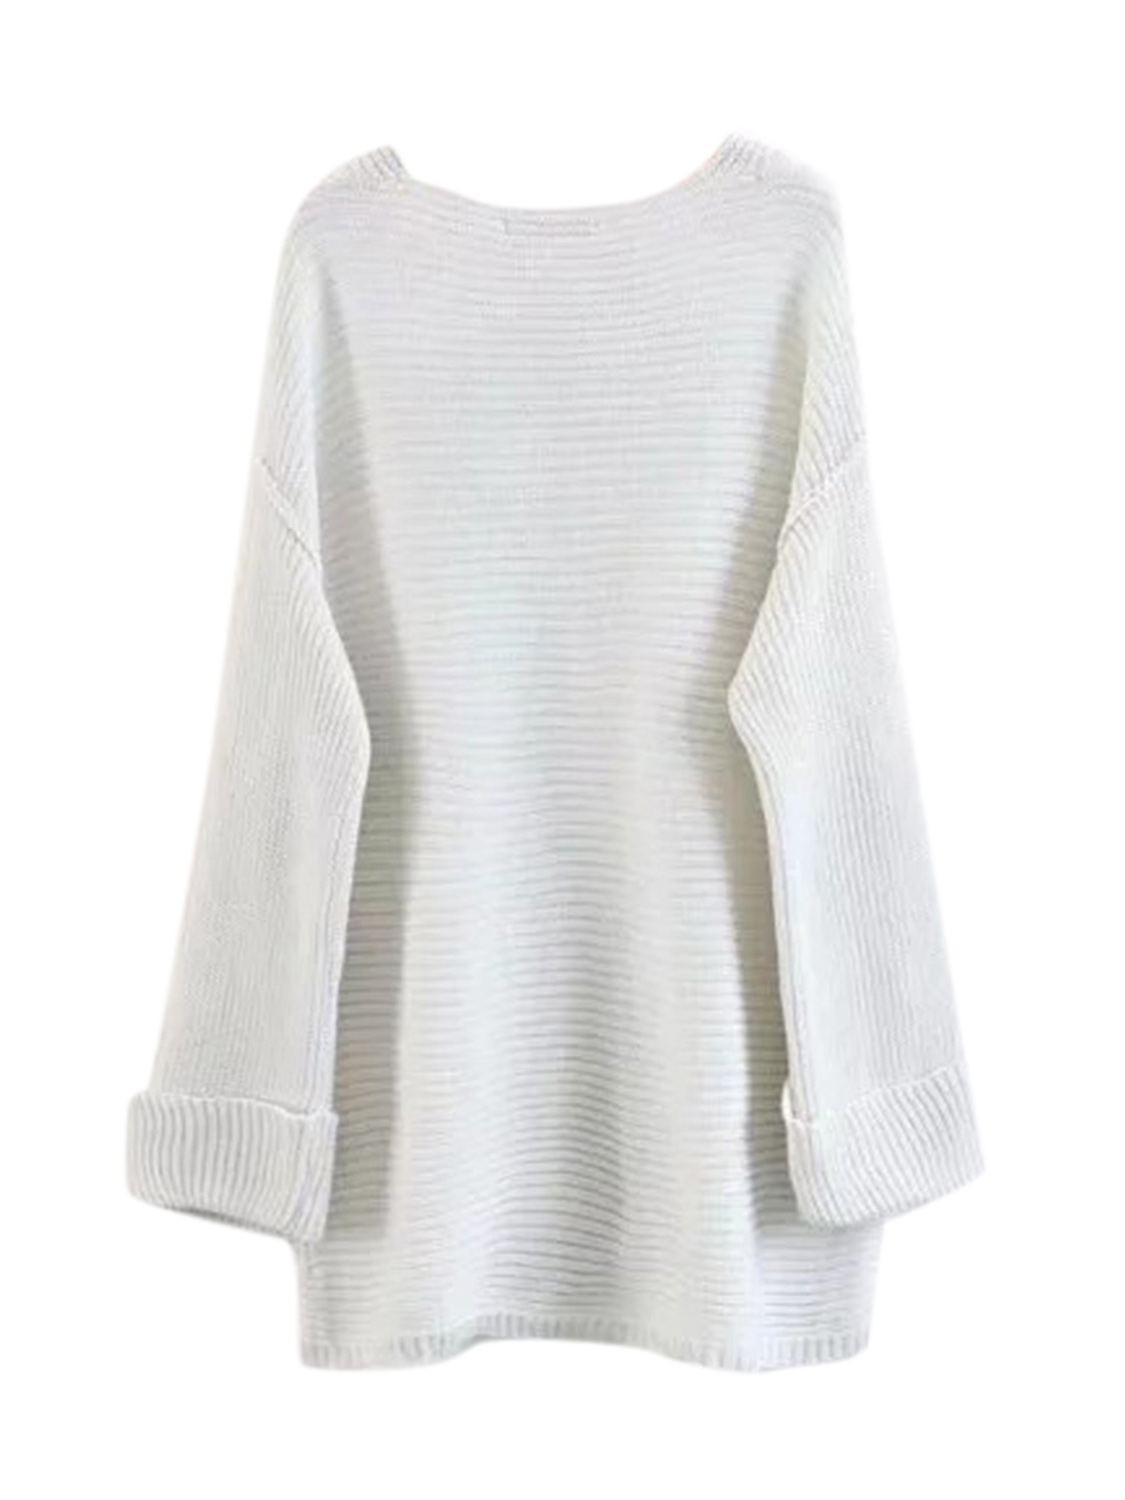 White V-neck Long Sleeve Turn Up Cuff Knit Sweater | Choies